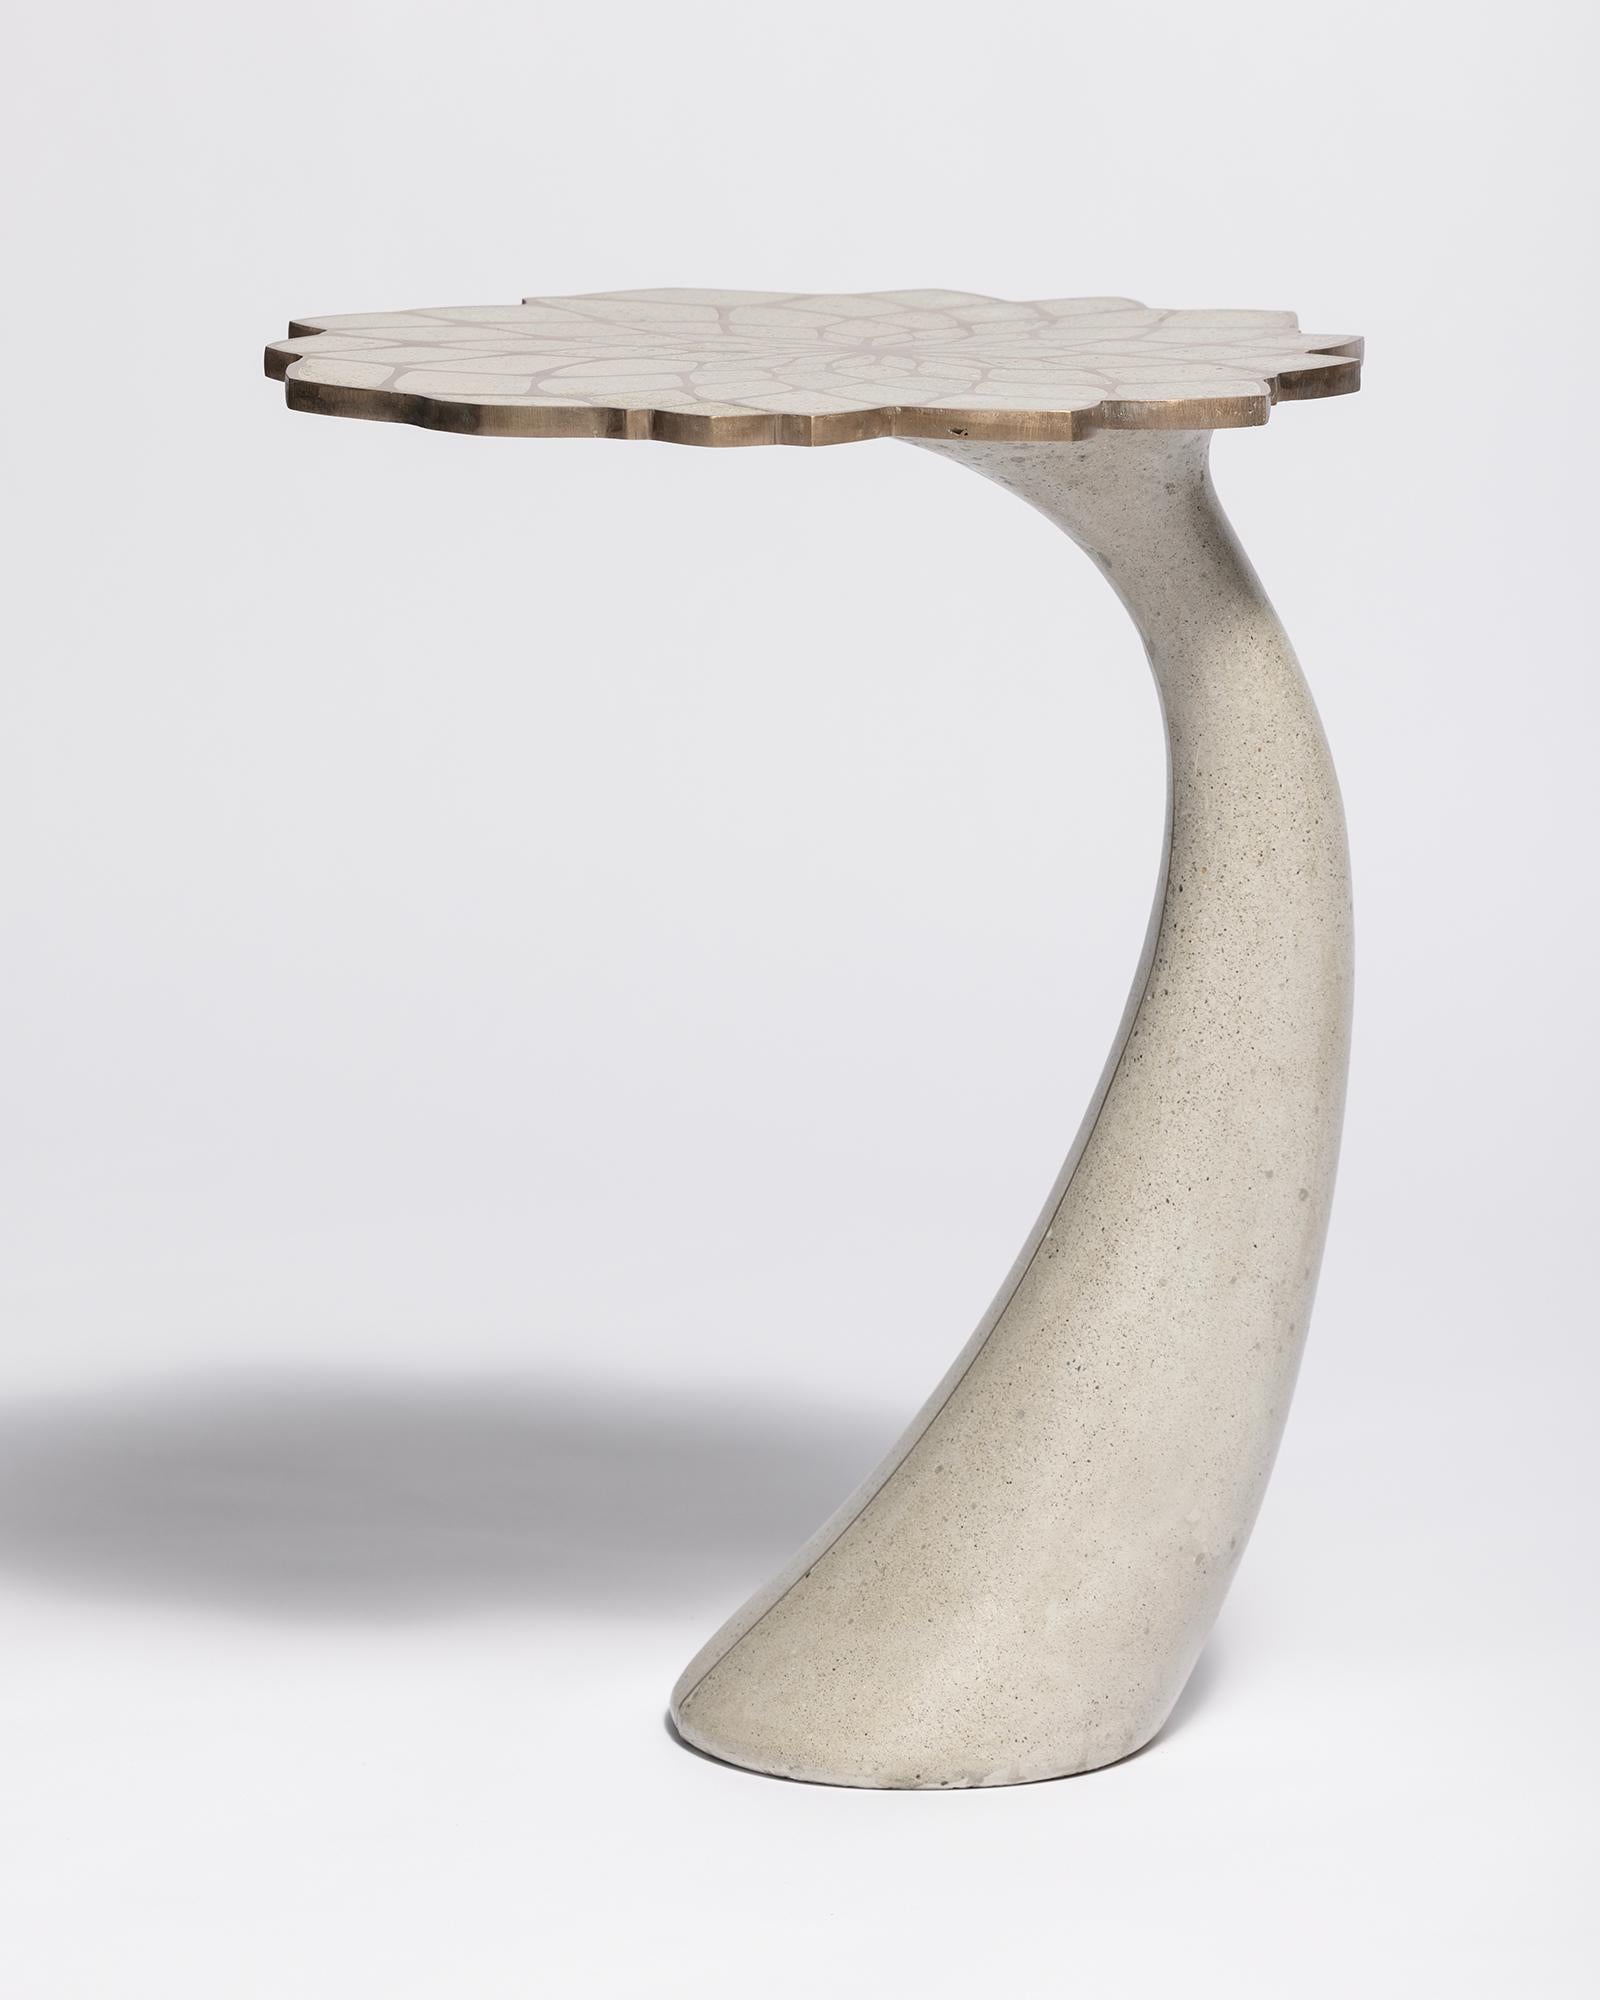 Organic Modern James de Wulf Exo Mosaic Lily Side Table For Sale